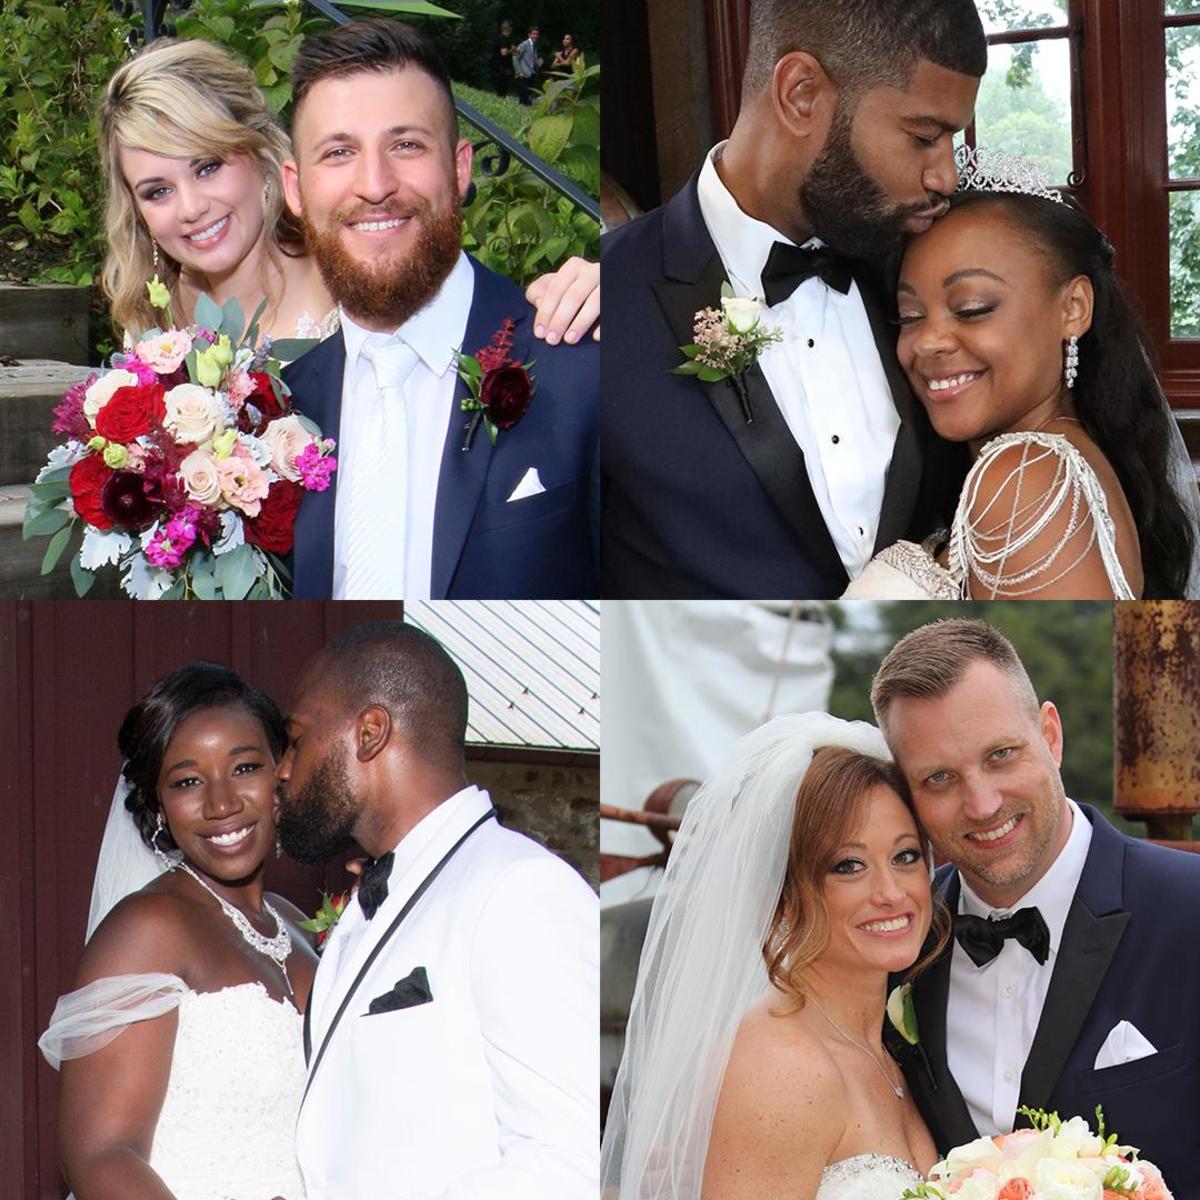 Four "Married at First Sight" couples